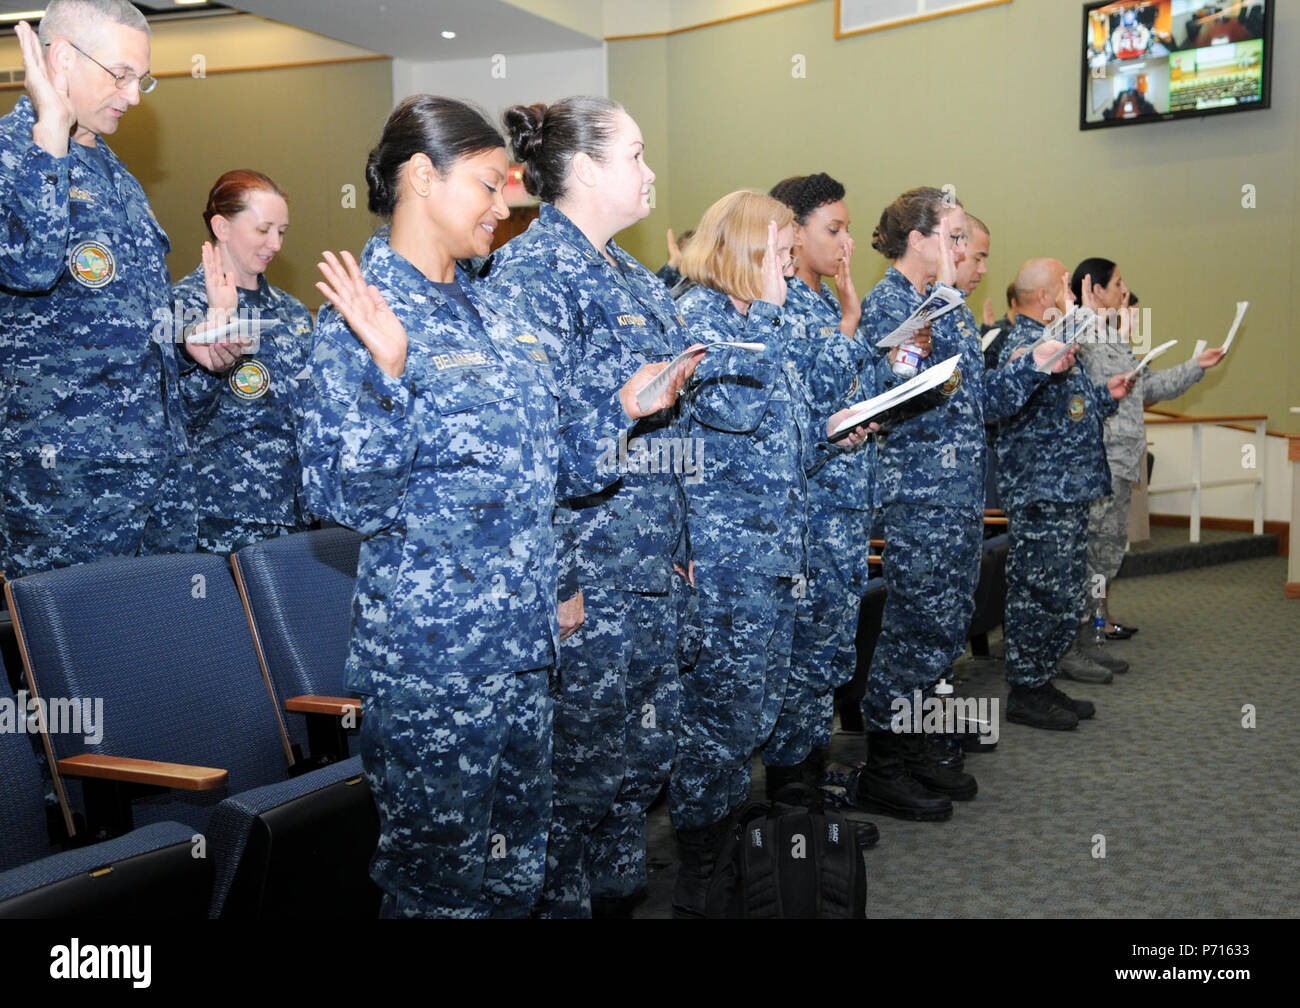 SAN ANTONIO (May 11, 2017) Nurses and medical technicians recite the Florence Nightingale Pledge during the closing ceremony for National Nurses Week at the Medical Education and Training Campus. Navy and Air Force nurses and medical technicians participated together in several health promotions activities throughout the week to commemorate Nurses Week. Stock Photo